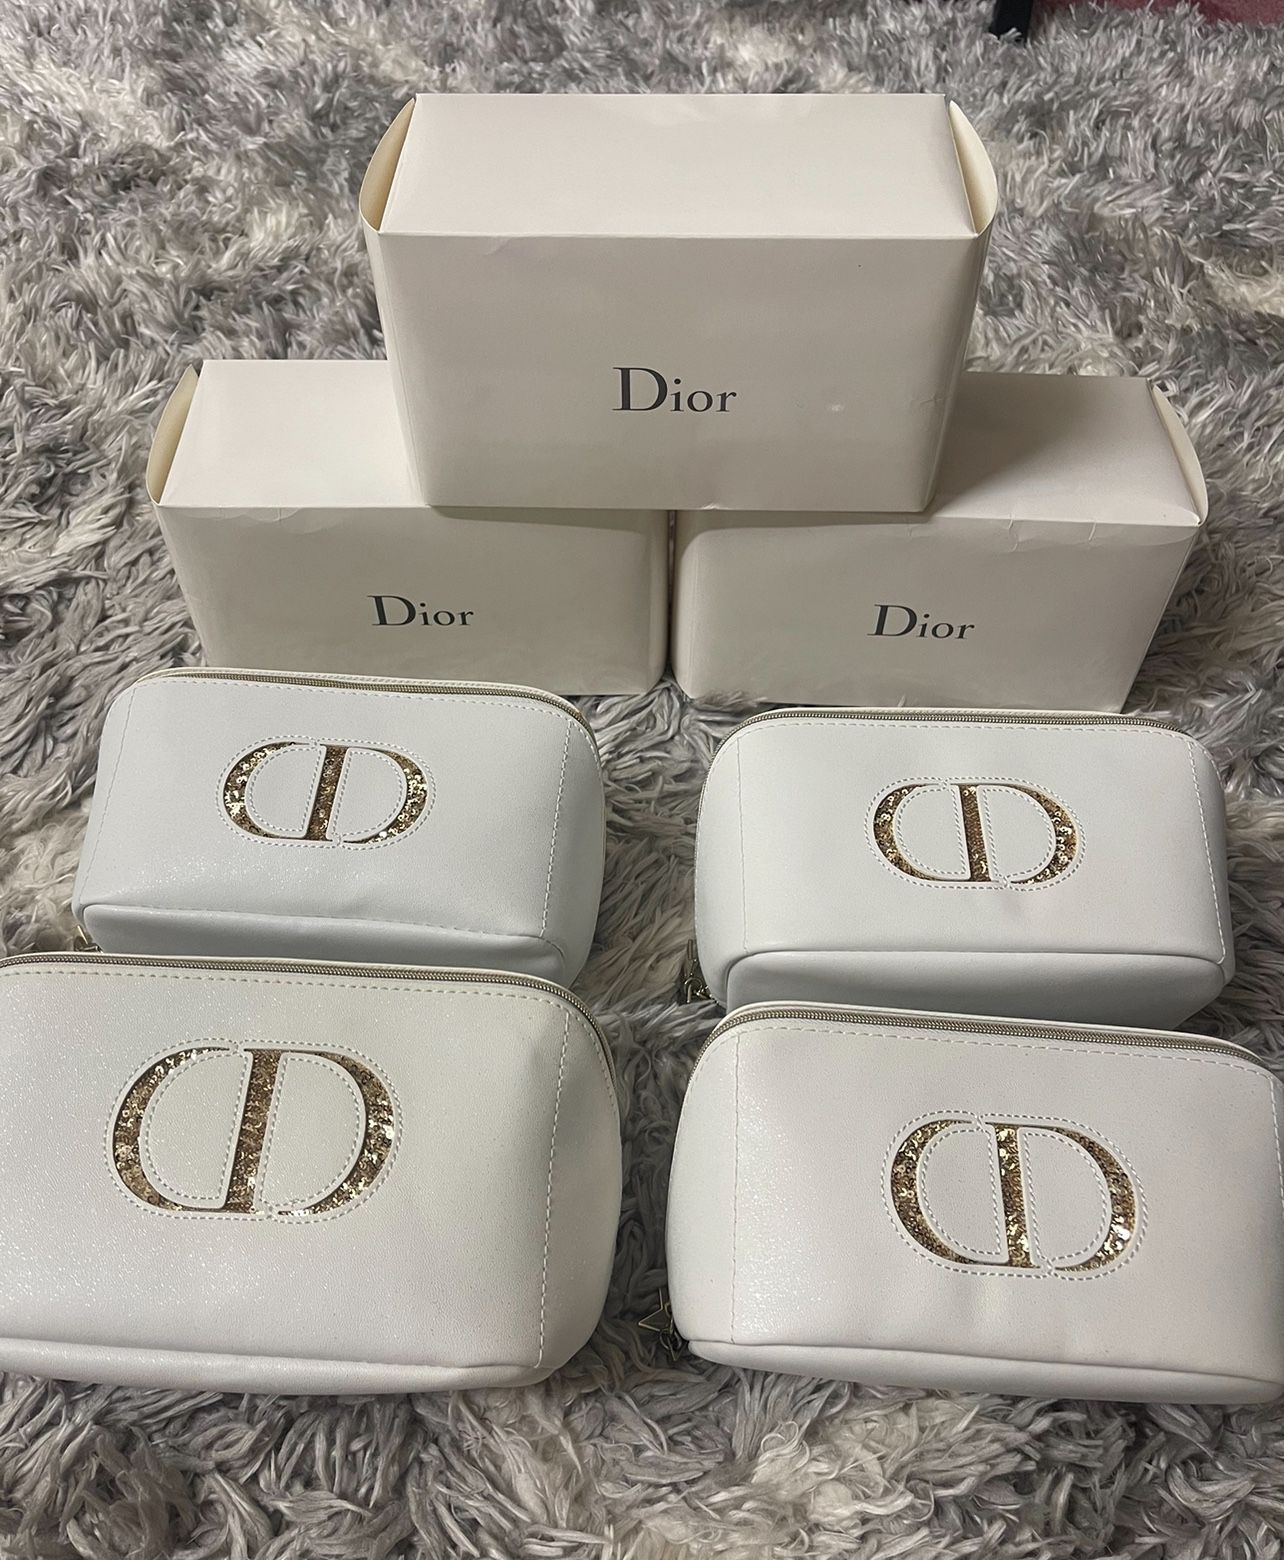 Authentic Dior cosmetic pouch